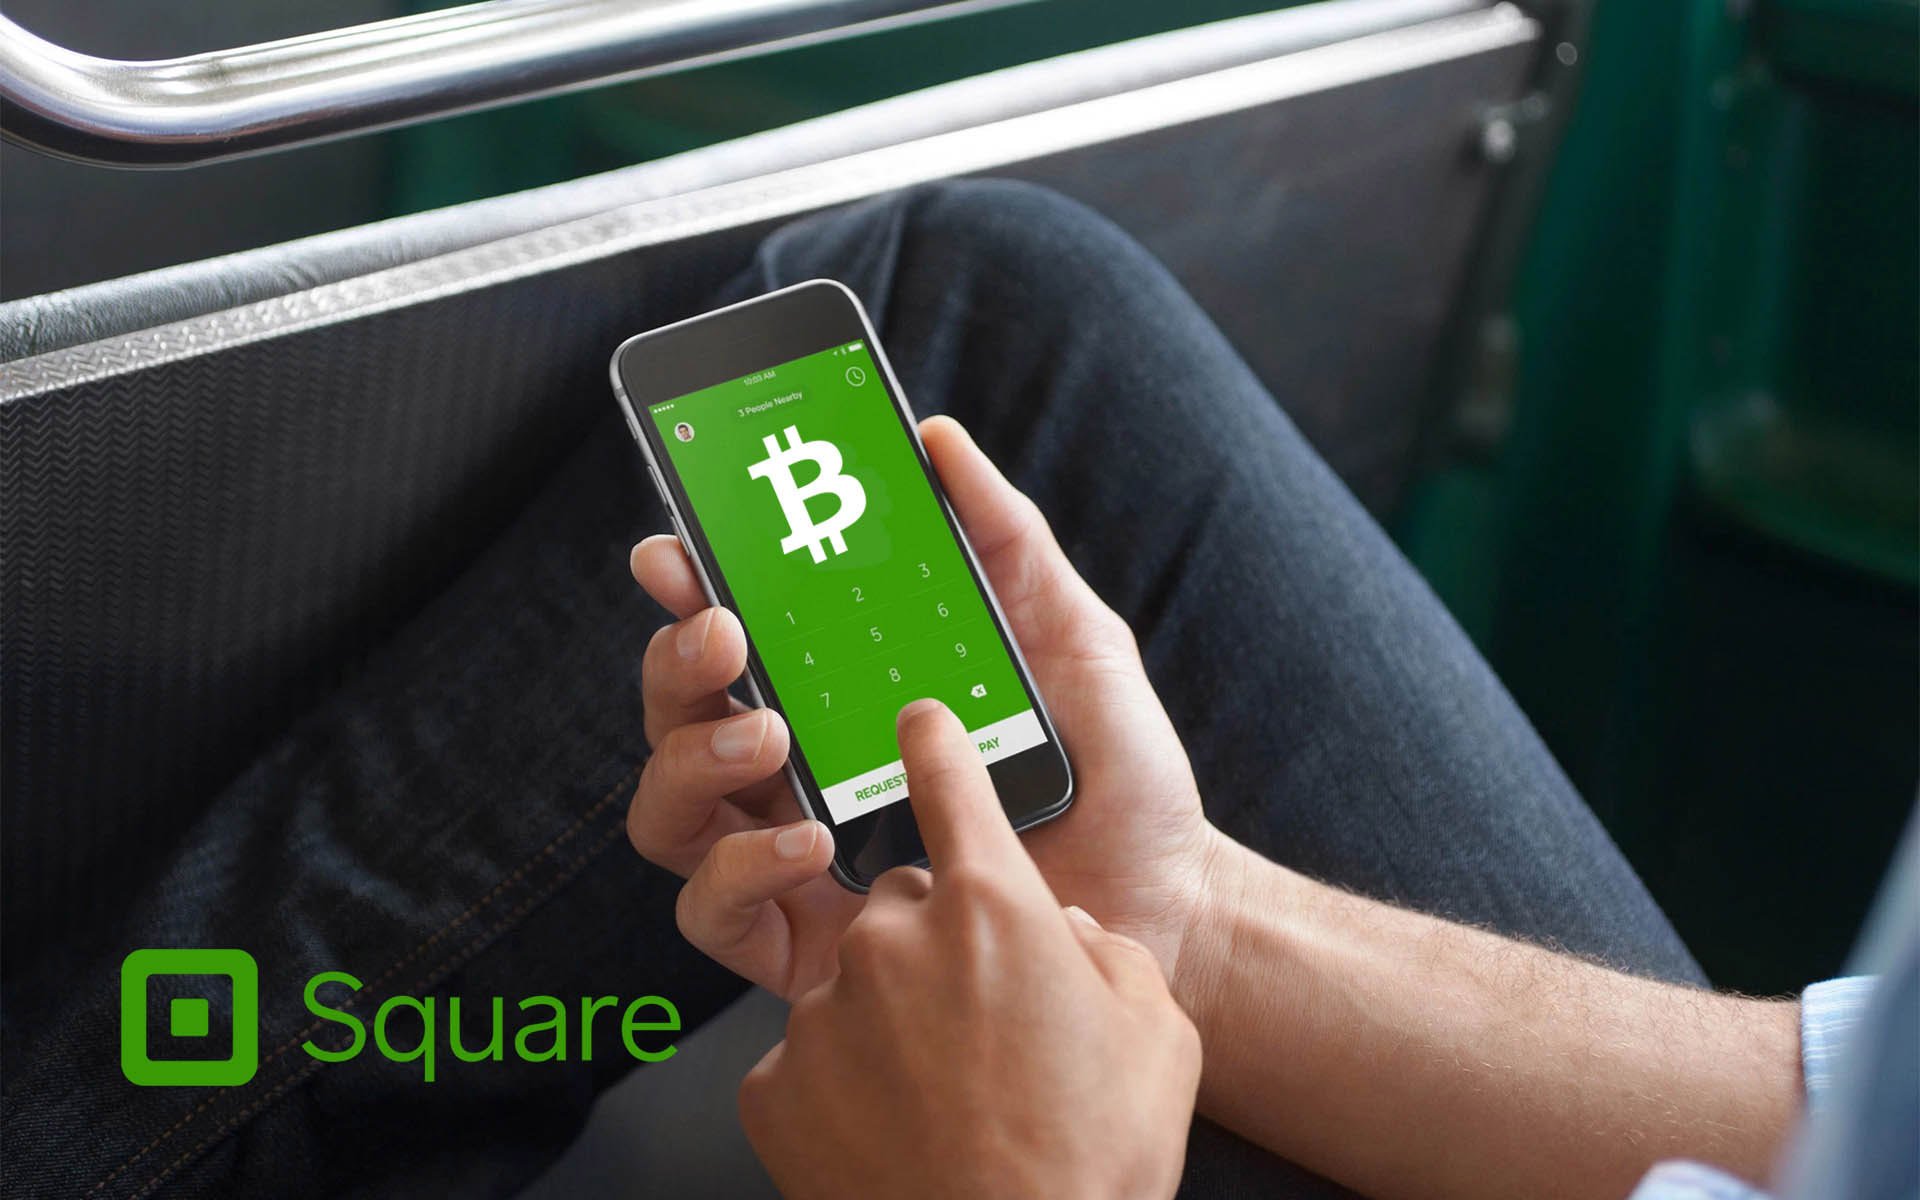 Square’s Cash App now lets users transact in bitcoin without paying fees